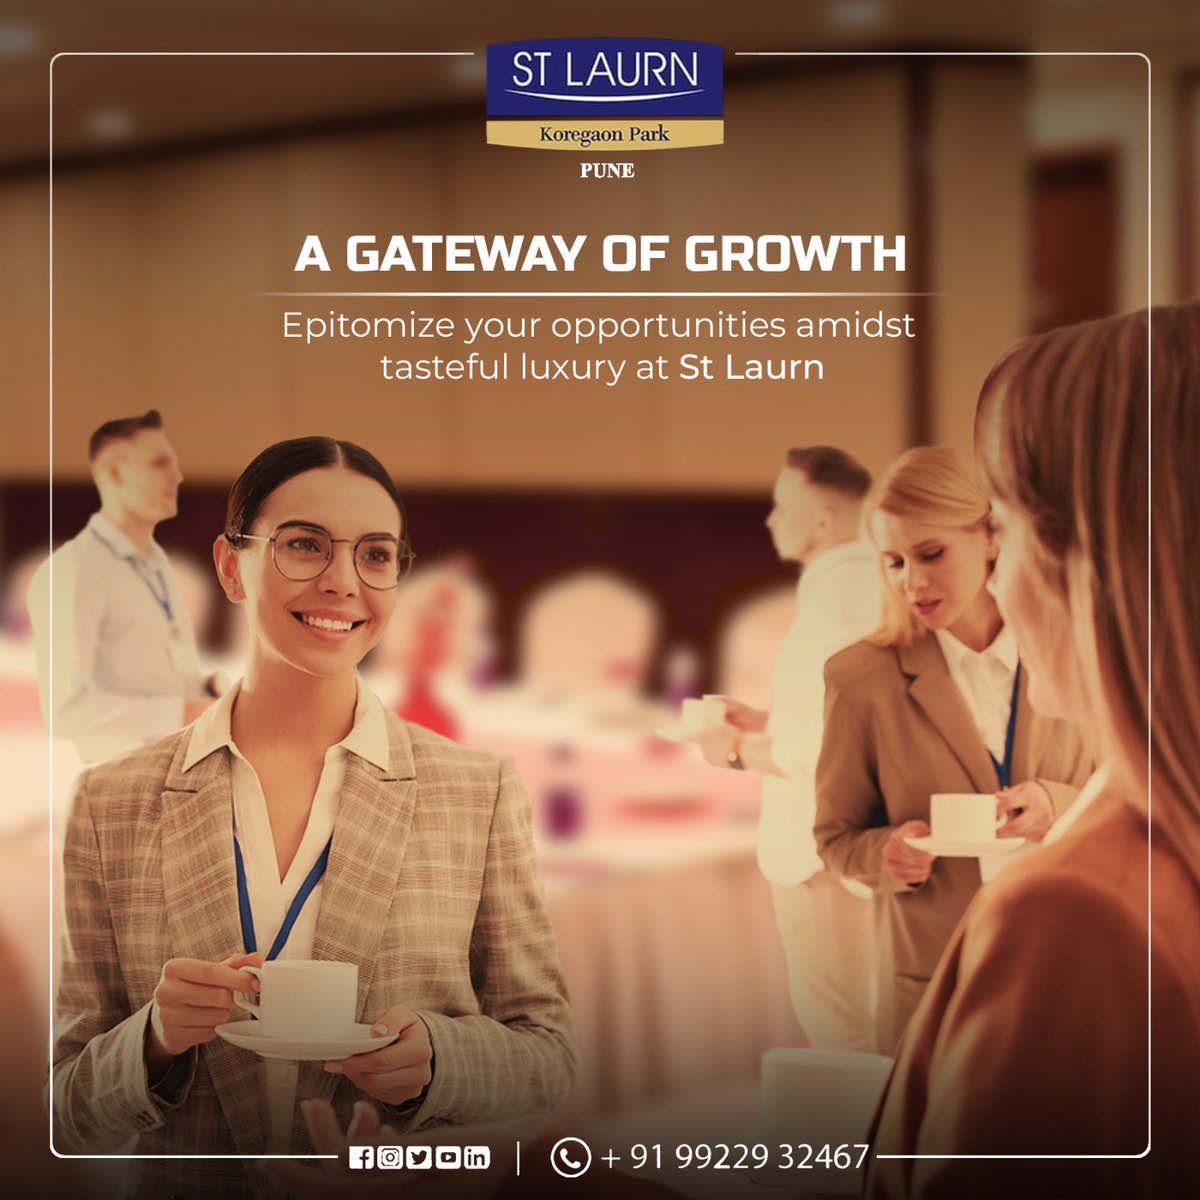 Transform your business meetings into unforgettable experiences at St Laurn! 🌟 Enjoy state-of-the-art amenities and exceptional service while you strategize for success. #StLaurnBusiness #MeetingGoals #ModernAmenities #unforgettableexperiences